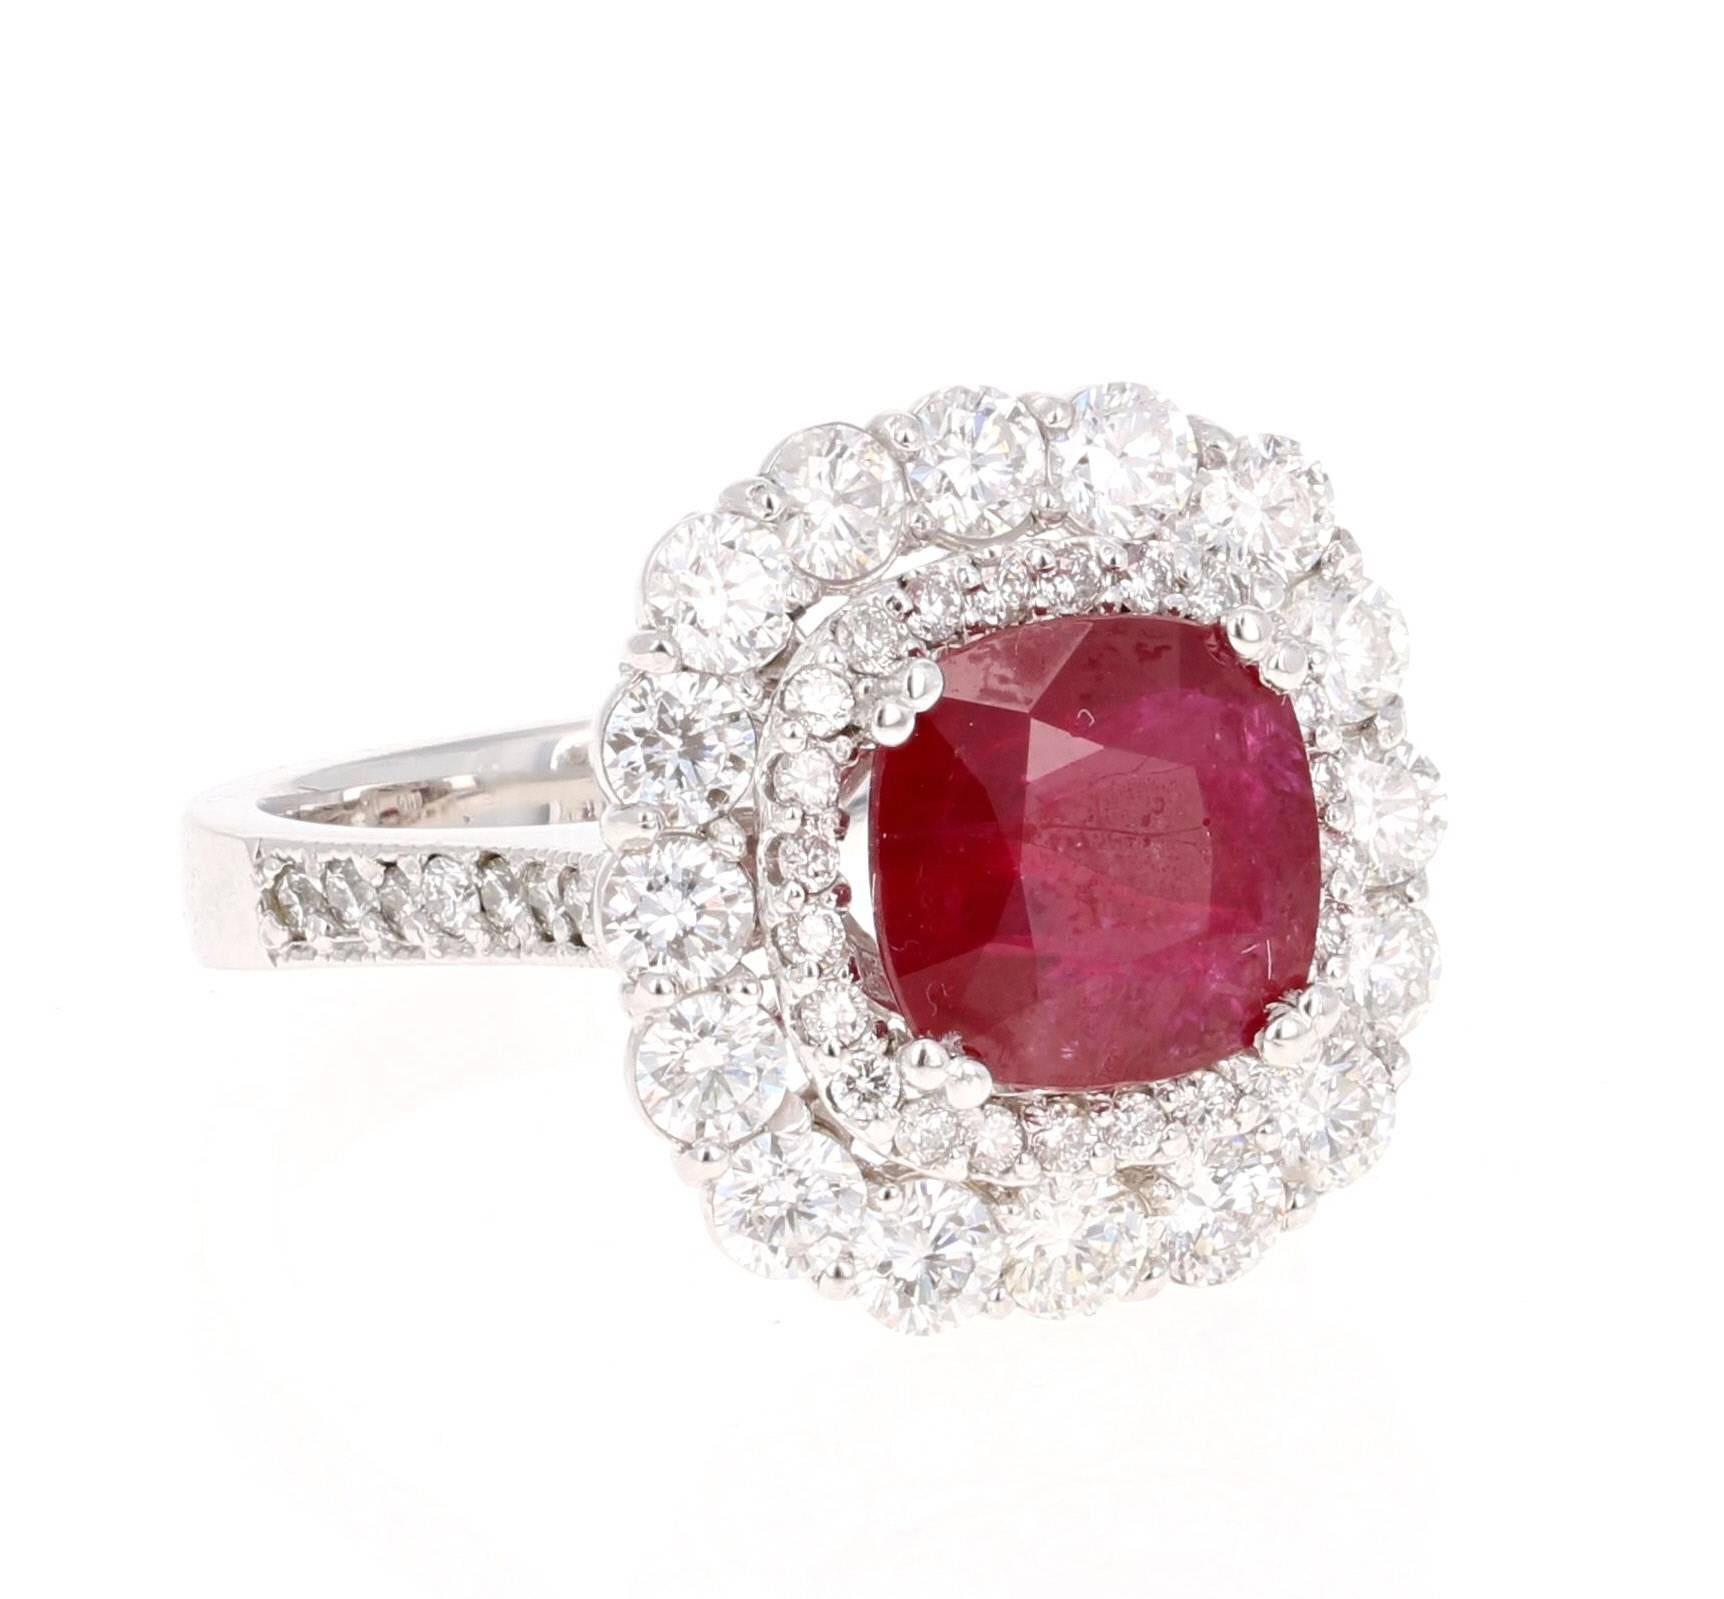 This is a breath-taking Ruby and Diamond ring.  The Ruby has origins from Southern Africa (Republic of Mozambique) and is 2.58 carats. It has a double halo of 54 Round Cut Diamonds weighing 1.85 carats (Clarity: SI2, Color: F). The total carat